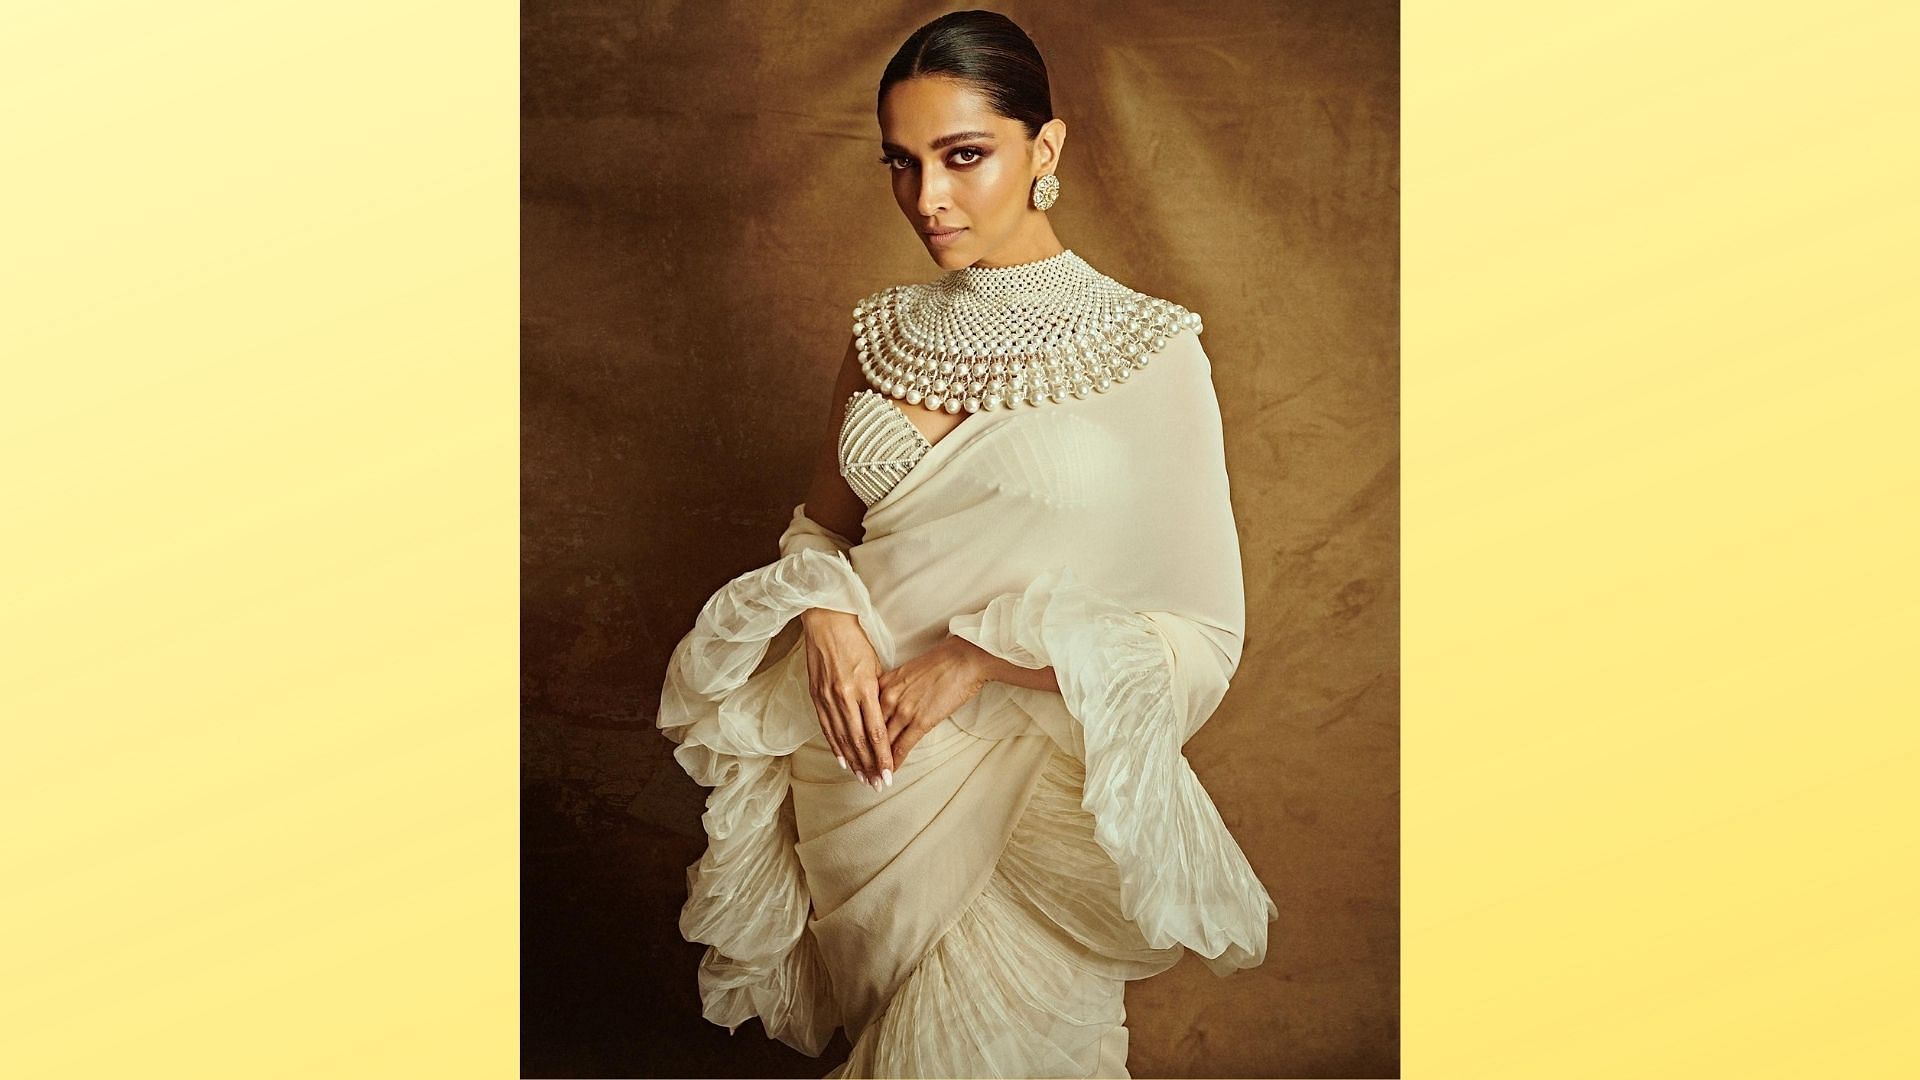 <div class="paragraphs"><p>As Deepika Padukone completed her stint as a jury member at Cannes Film Festival 2022, the Bollywood actor dropped pictures of her newest outfit for the closing ceremony – a dazzling white saree.</p><p><br></p></div>